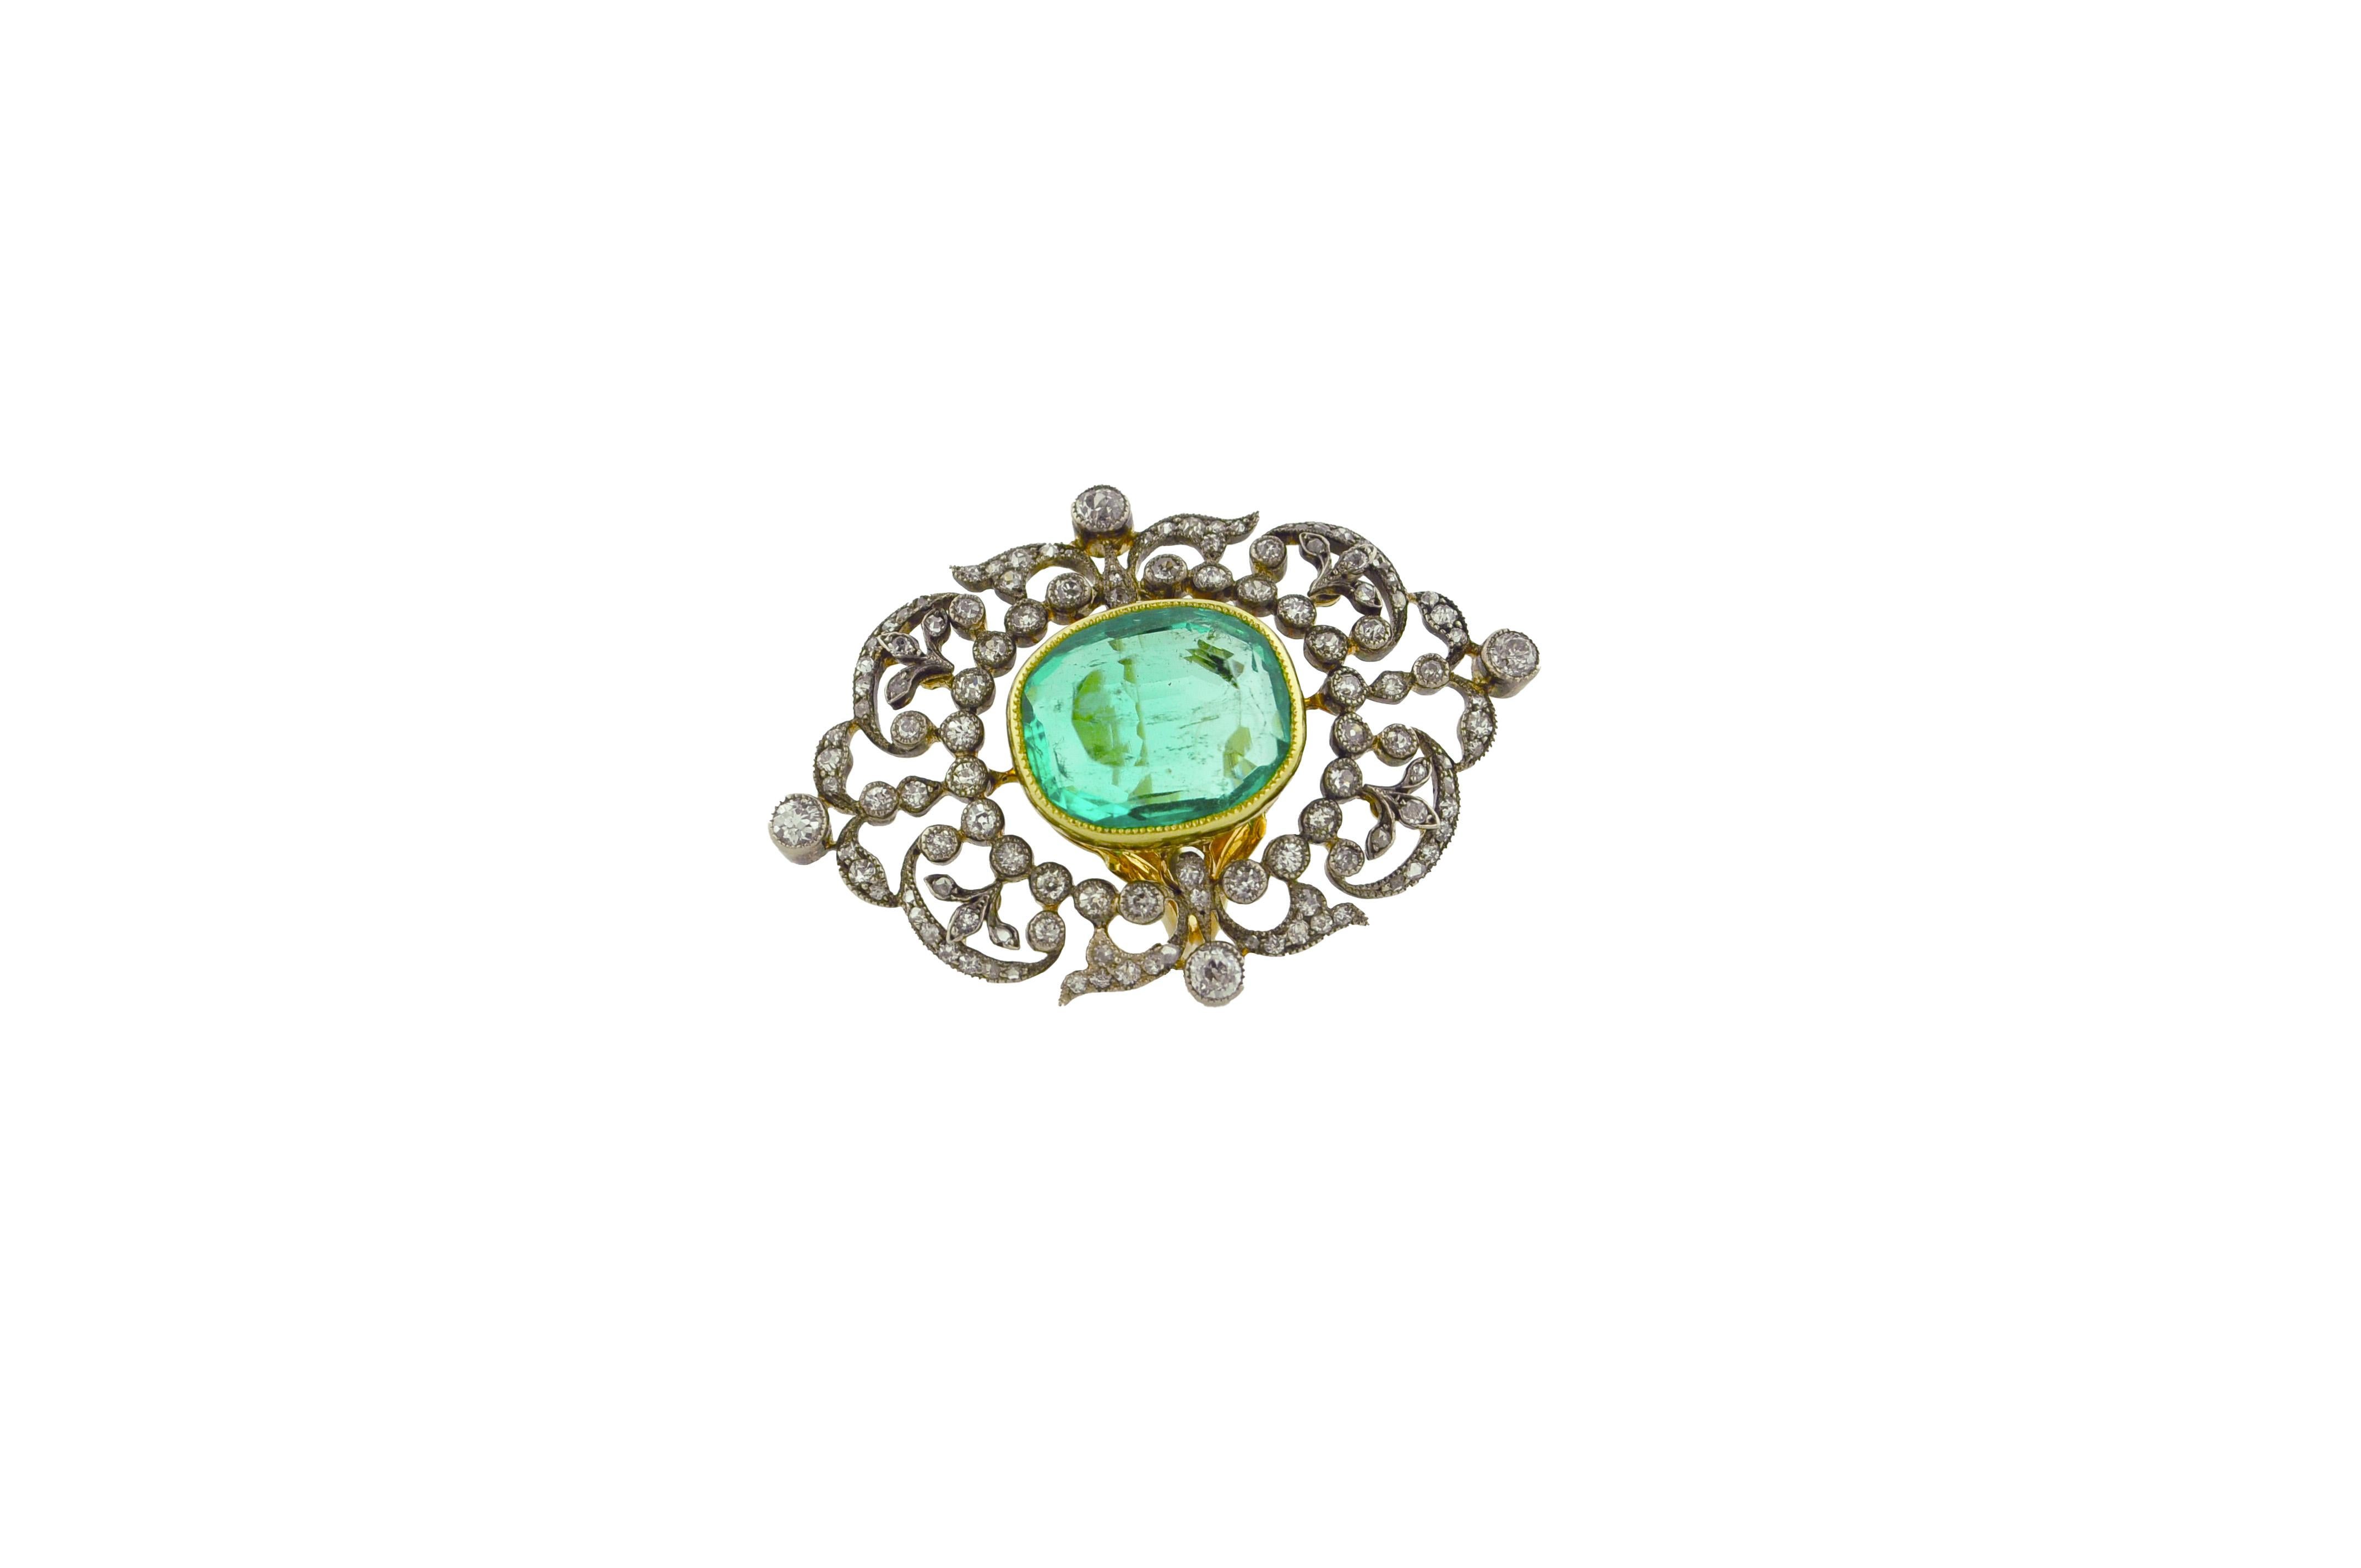 This piece was originally a pendant that dates back to the beginning of the 20th century and was later converted into a ring in early 2000.

Emerald: 14.4mm x 12.00mm x 6.5mm

Length of the ring: 1 3/4 inches 
Width: 1 1/4 inches

Ring size 5 1/2